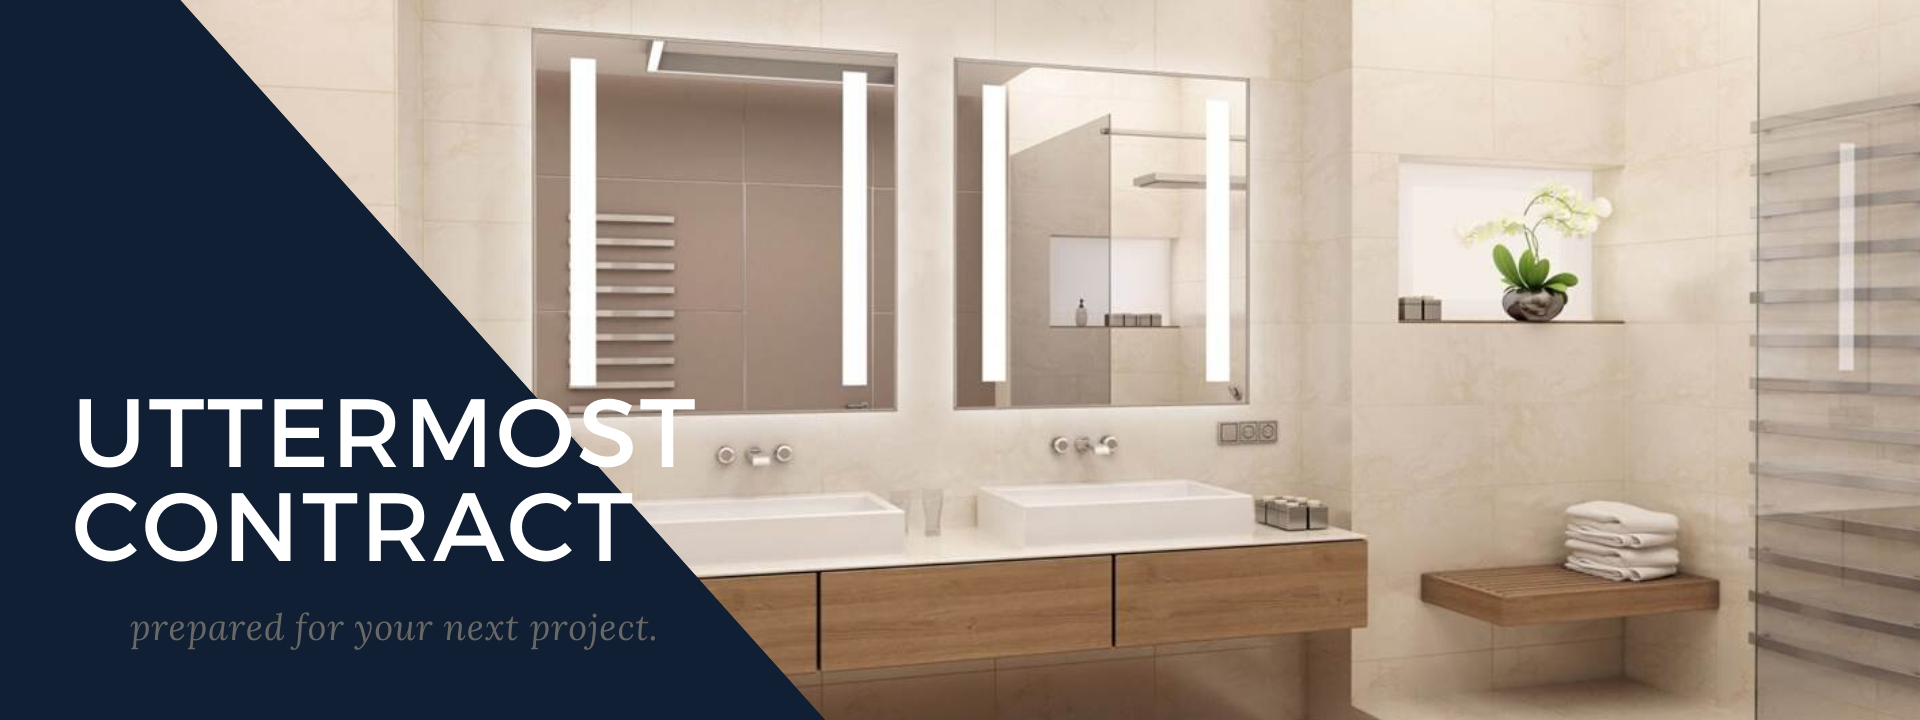 Uttermost Contract.  Prepared for your next project.  A backlit mirror is shown in a bathroom setting.